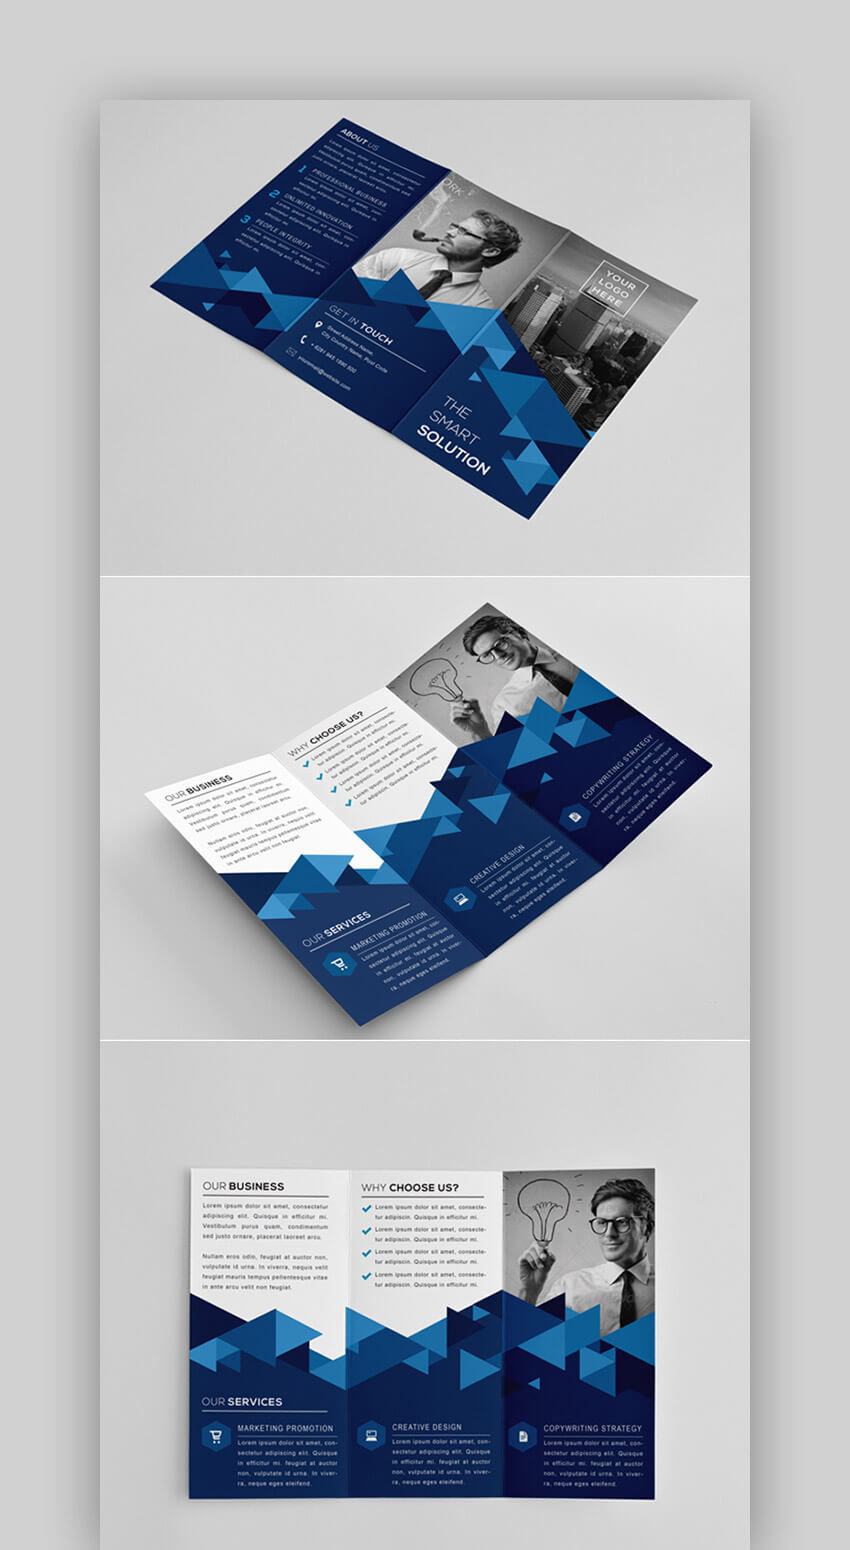 30 Best Indesign Brochure Templates - Creative Business With Regard To Brochure Templates Free Download Indesign